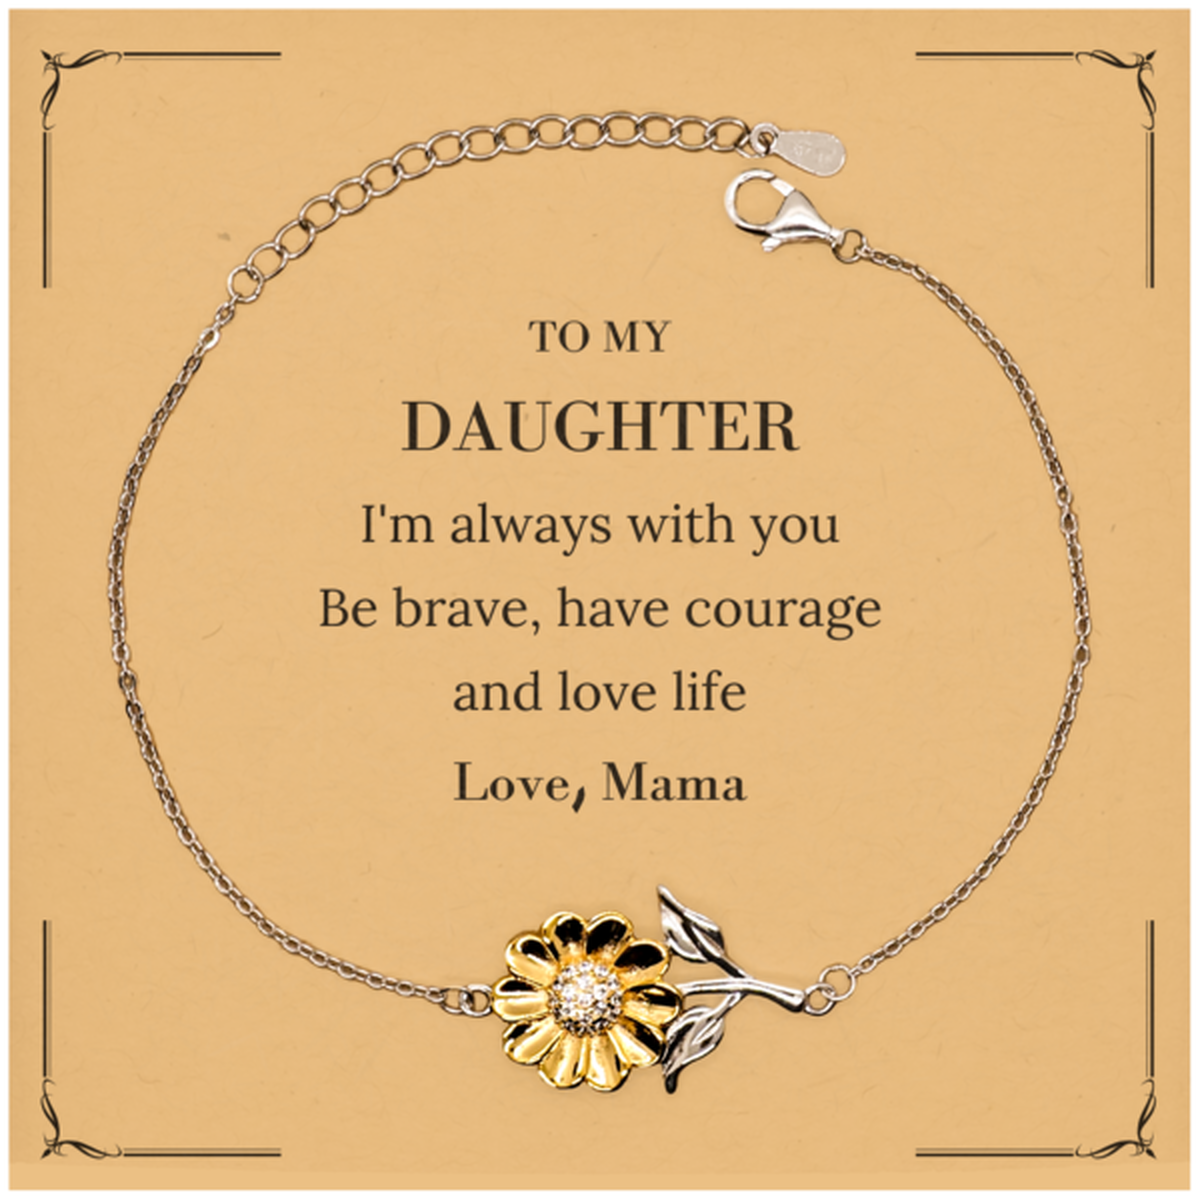 To My Daughter Gifts from Mama, Unique Sunflower Bracelet Inspirational Christmas Birthday Graduation Gifts for Daughter I'm always with you. Be brave, have courage and love life. Love, Mama